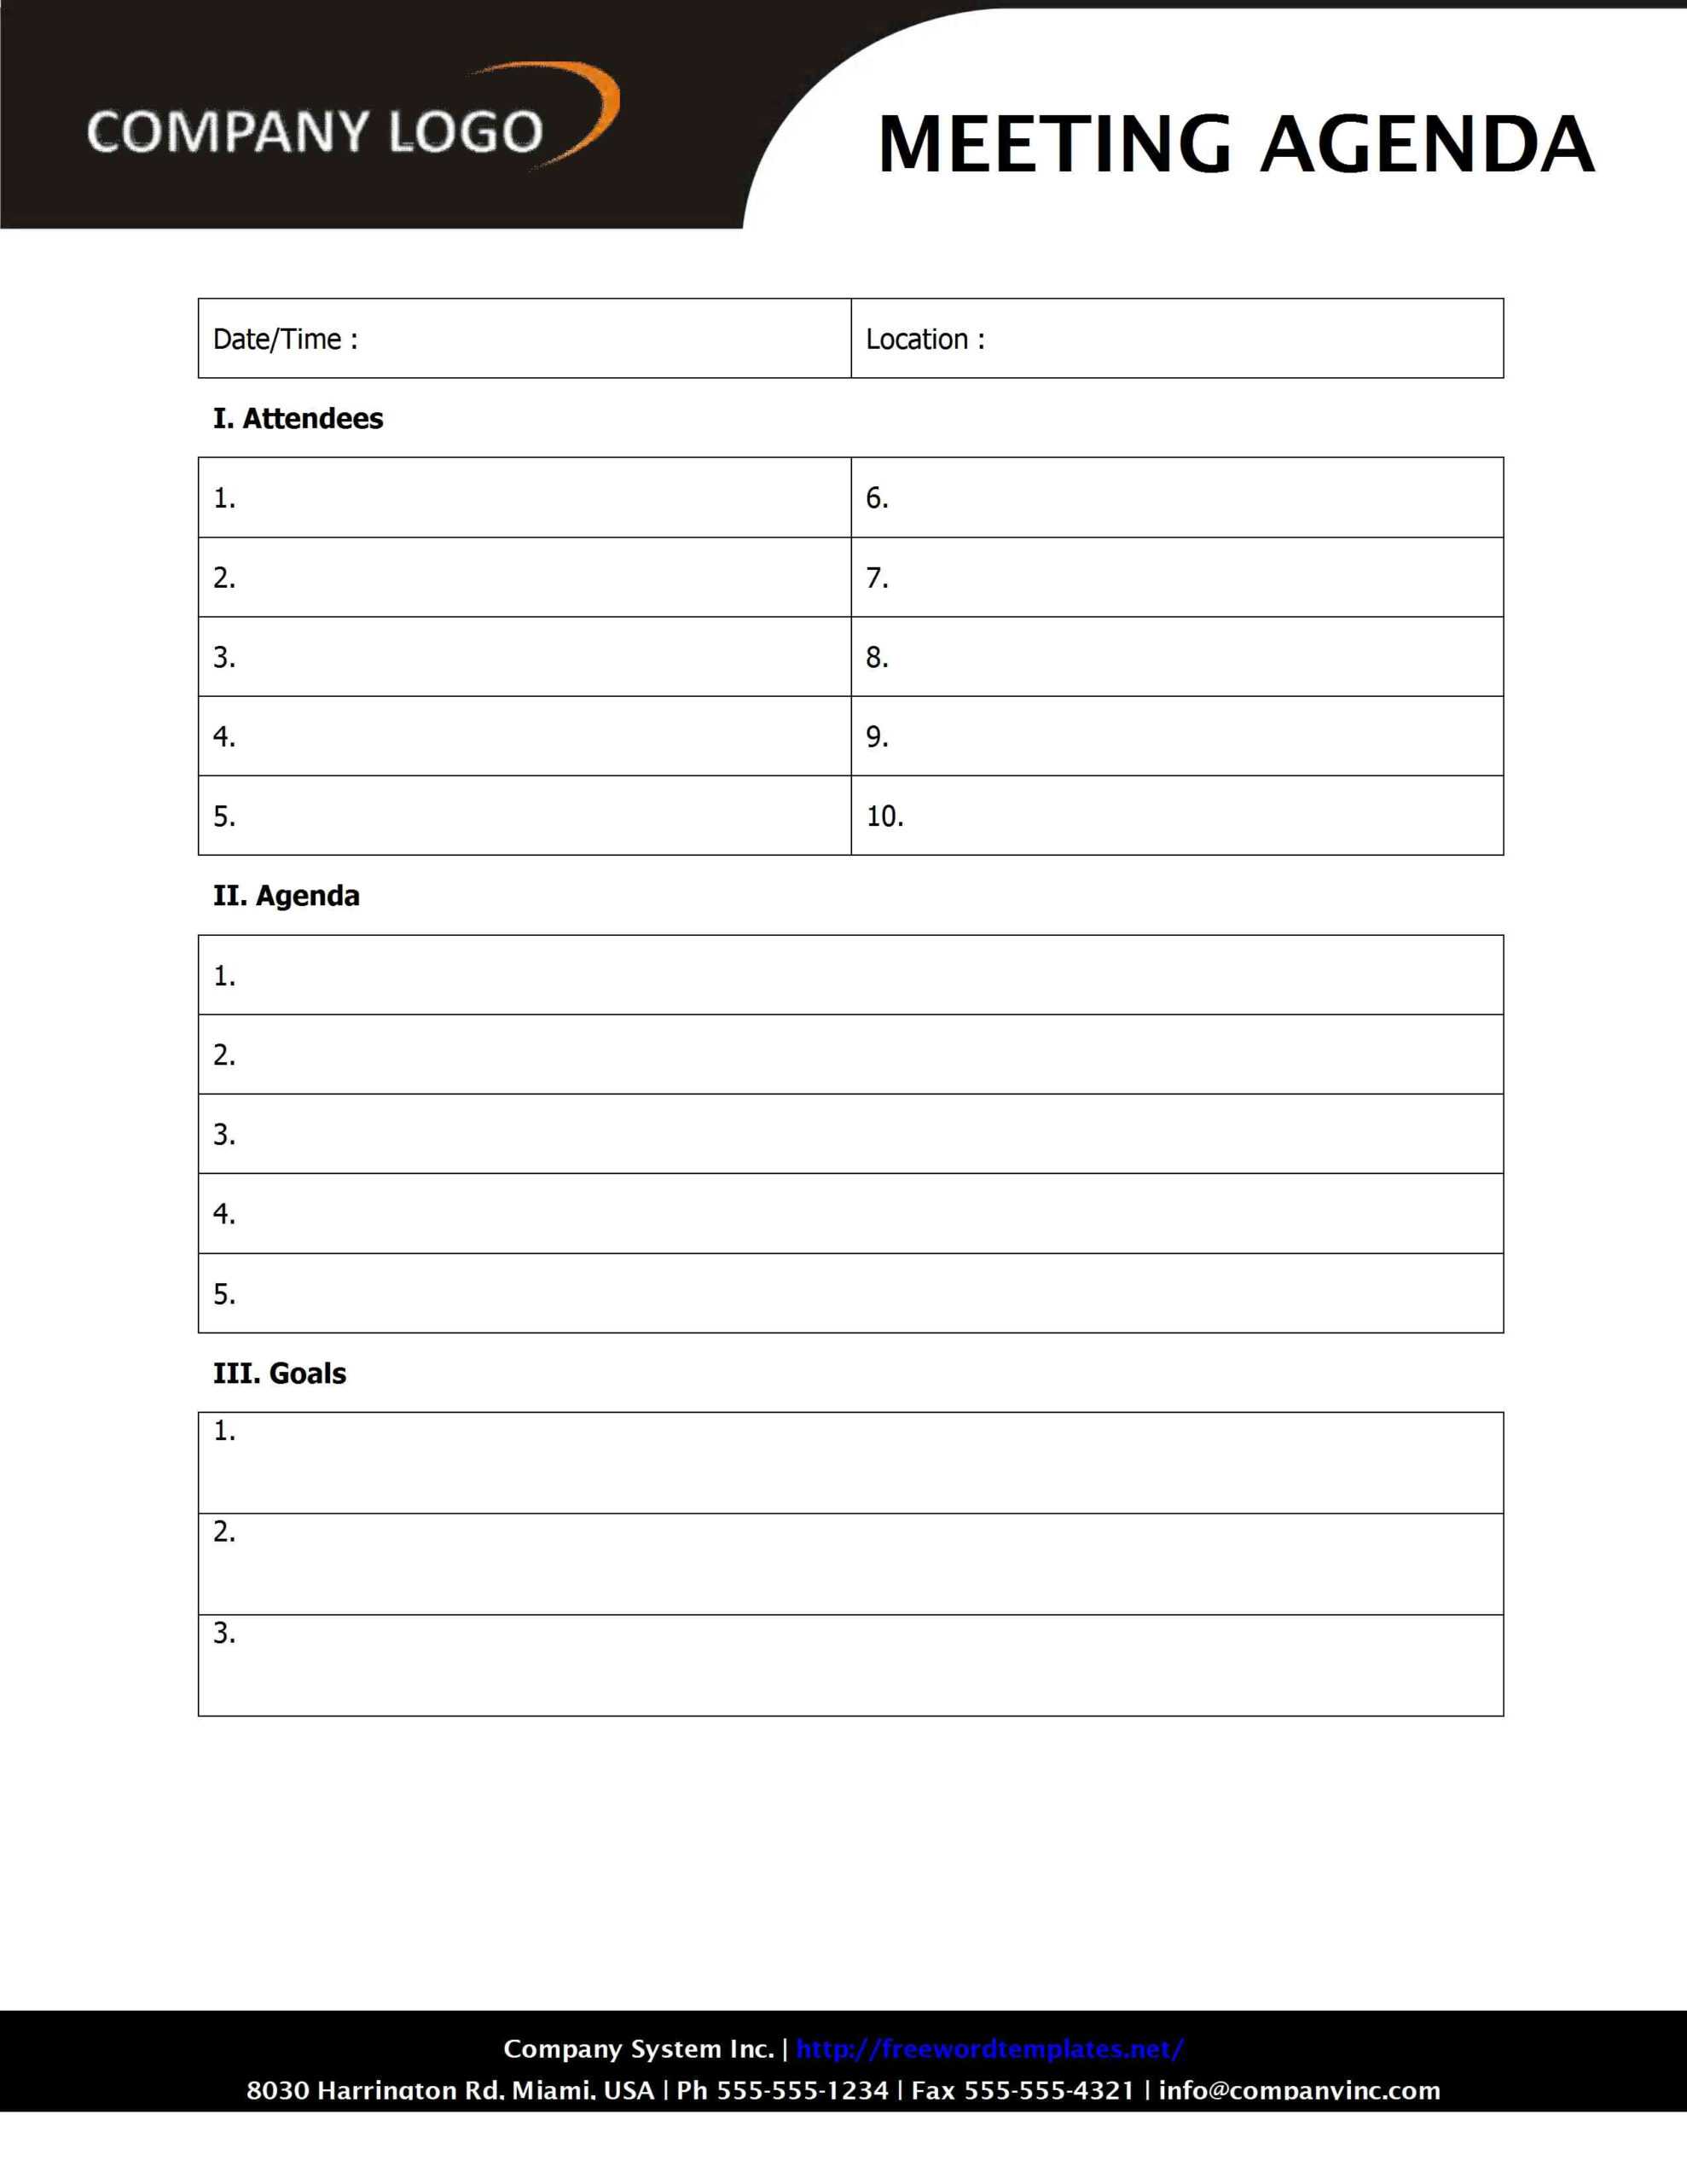 Templates Of Meeting Agenda Sd1 Style In Free Meeting Agenda Templates For Word